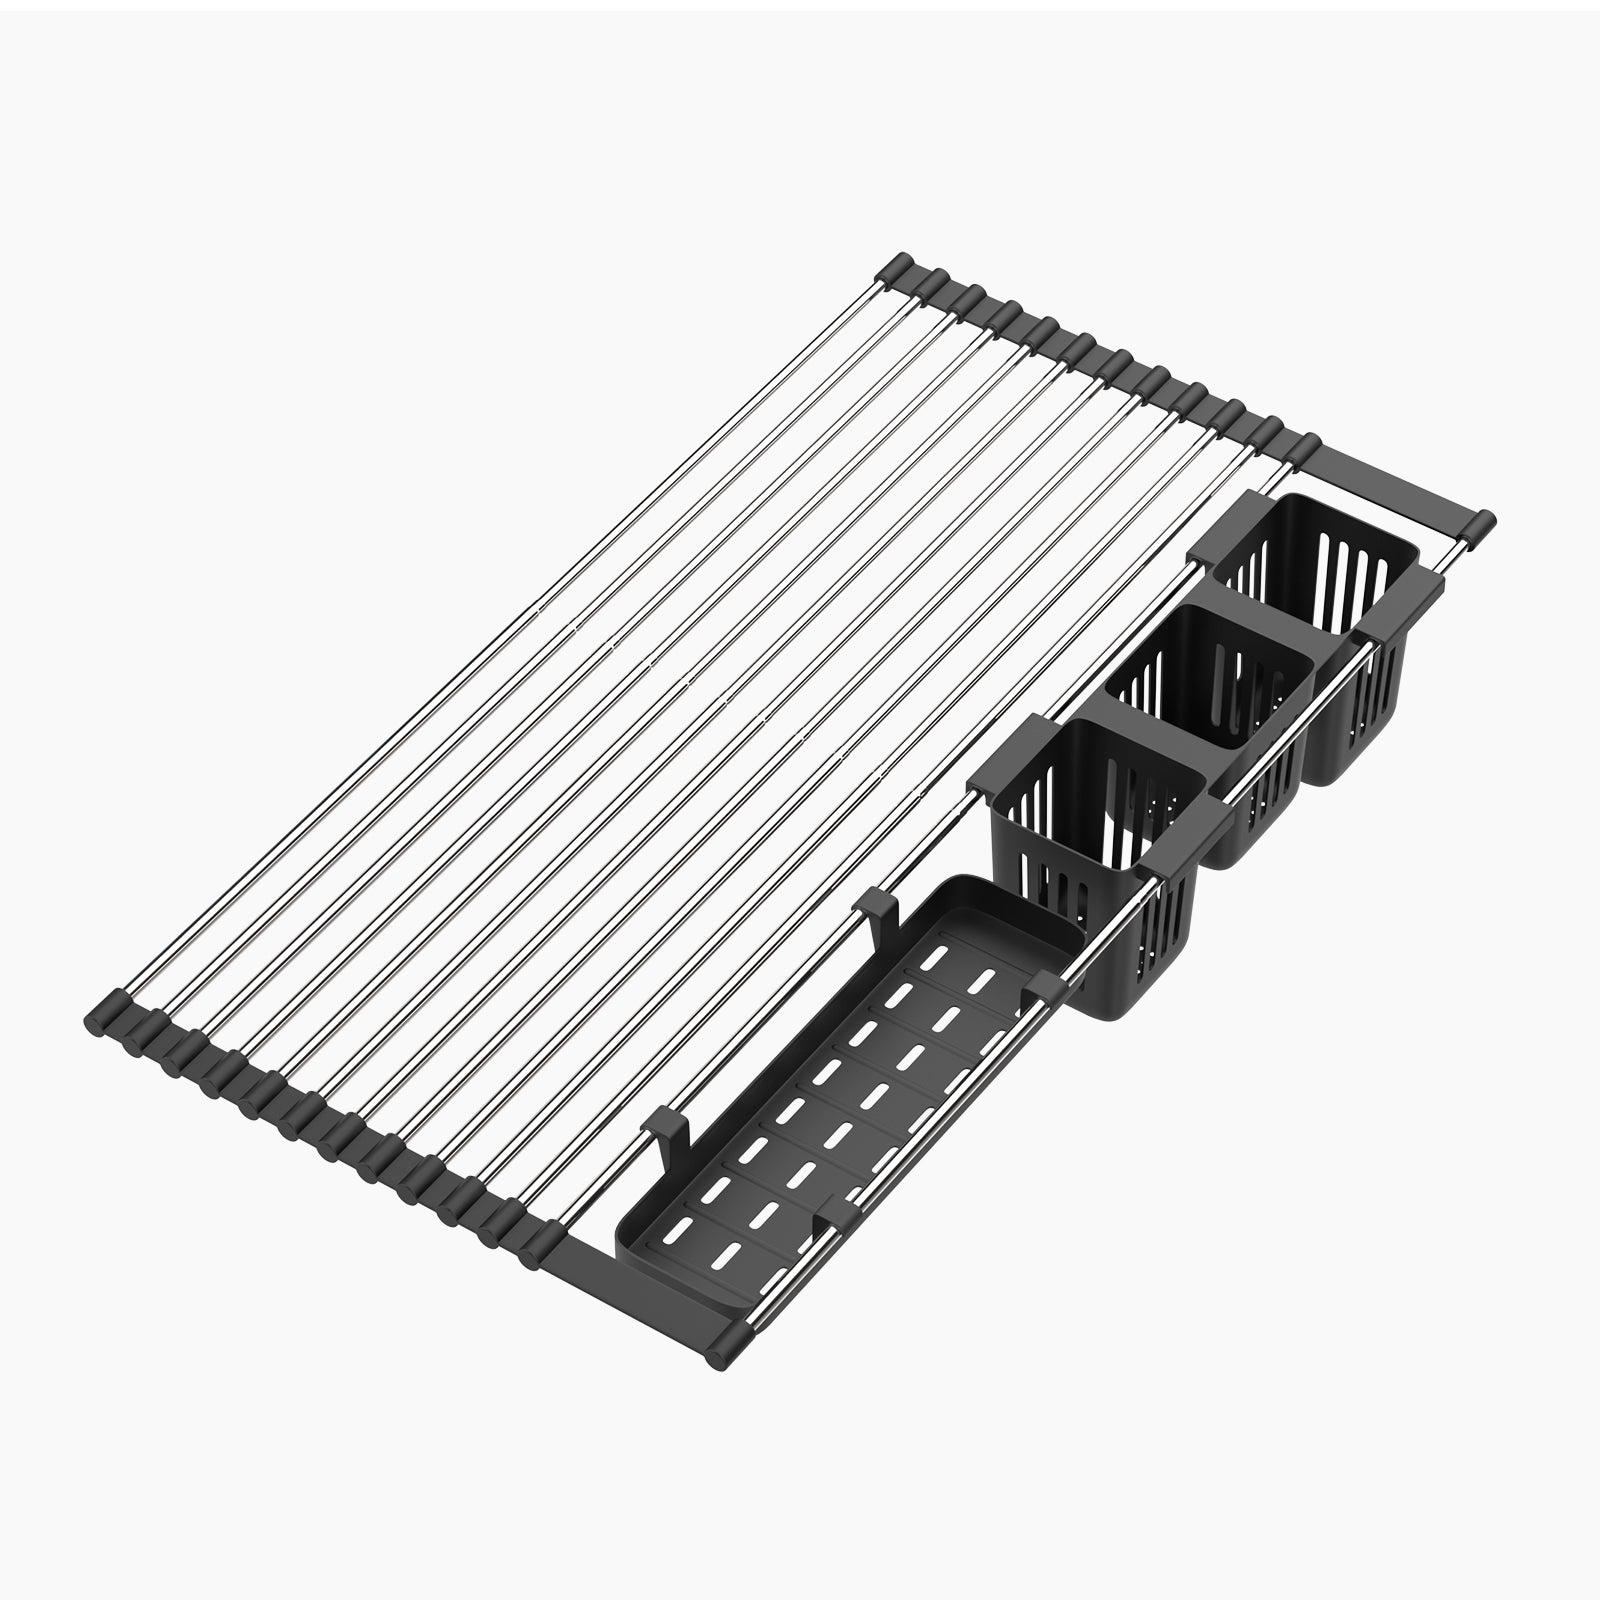 Lefton Expandable Roll Up Dish Drying Rack - DDR2201 -Kitchen Accessories- Lefton Home